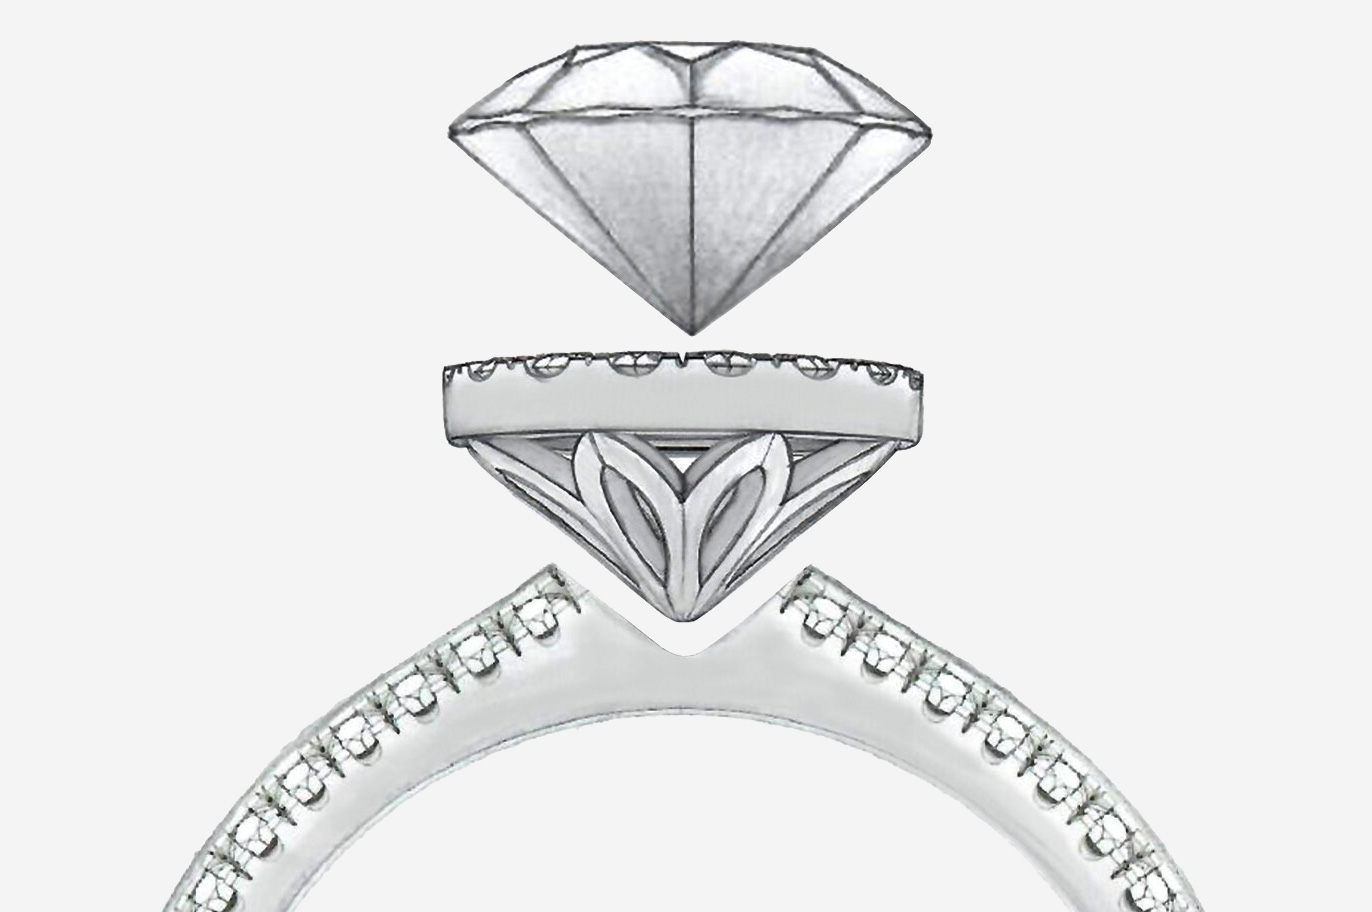 Custom design an engagement ring—and coordinating wedding band—as unique as the love you share.